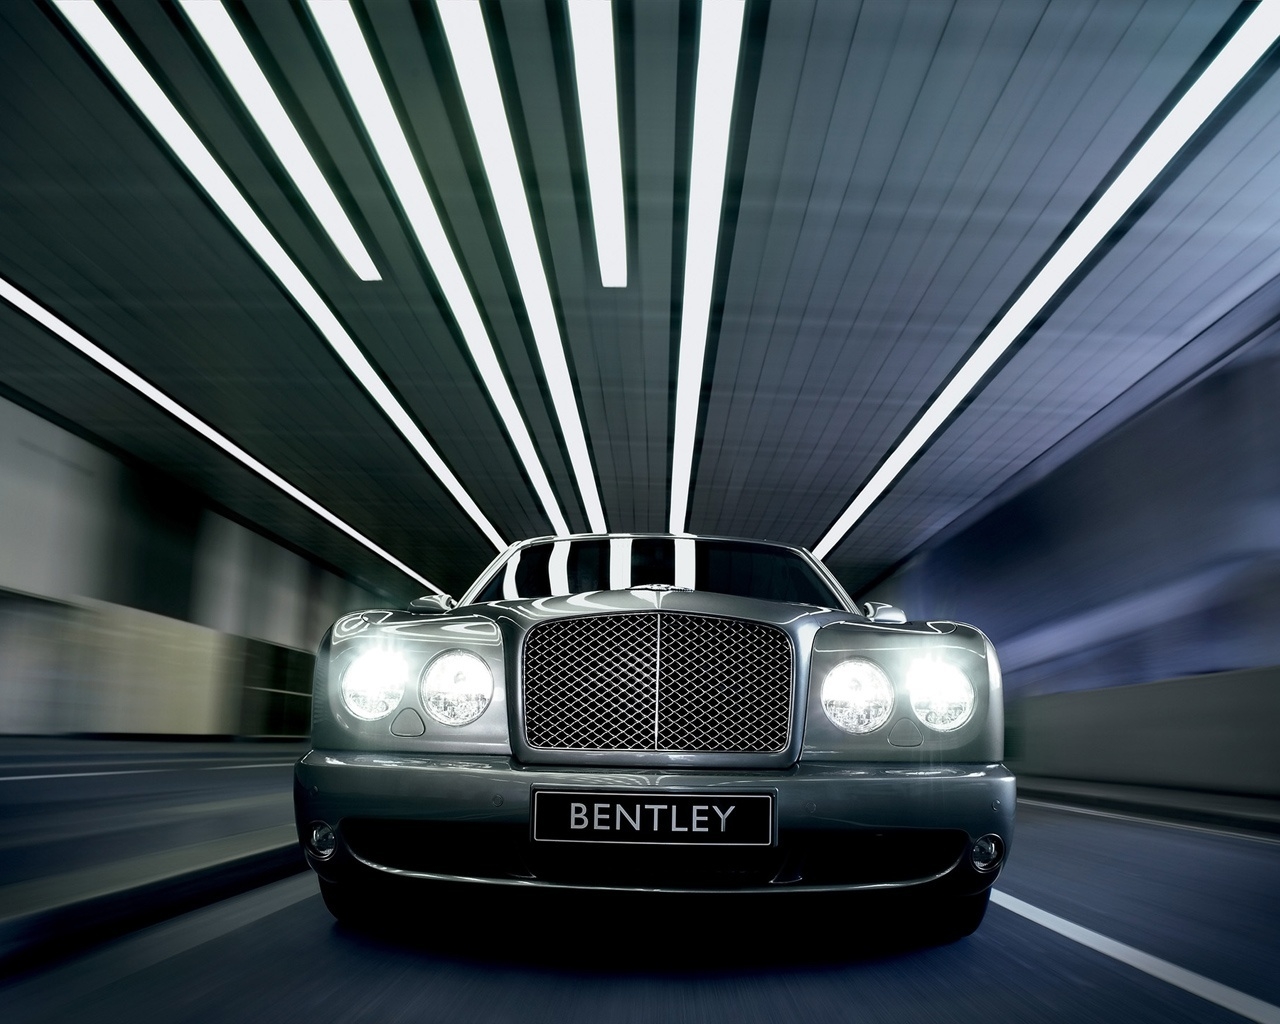 Bentley Arnage Front 2007 for 1280 x 1024 resolution